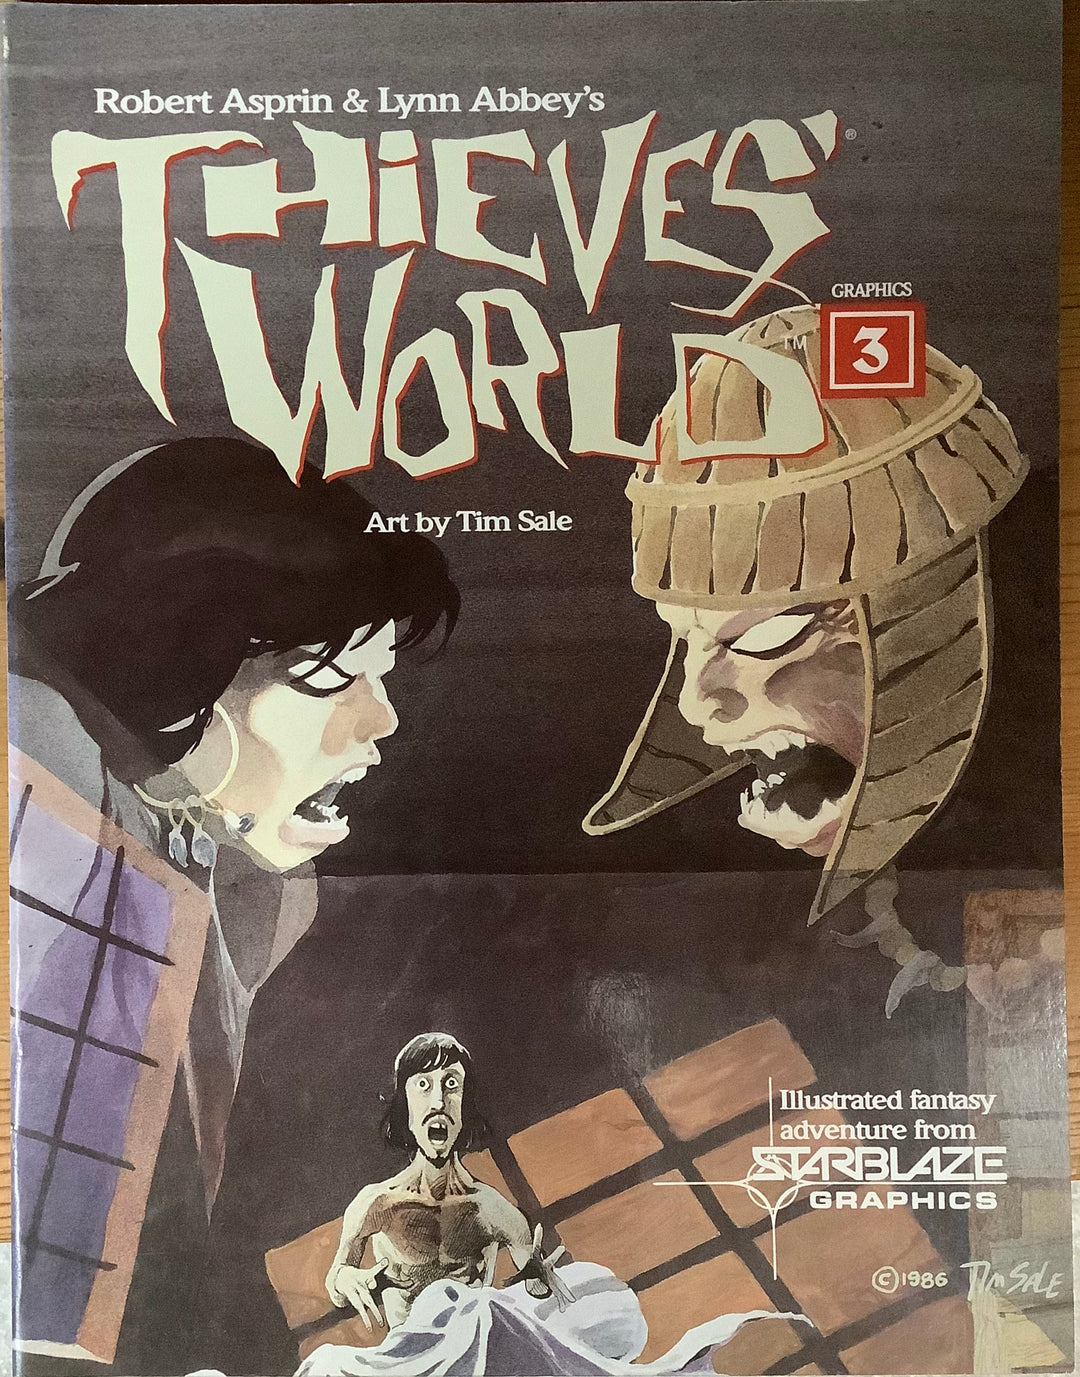 Thieves' World by Tim Sale Vol #3 Graphic Novel OXS-12